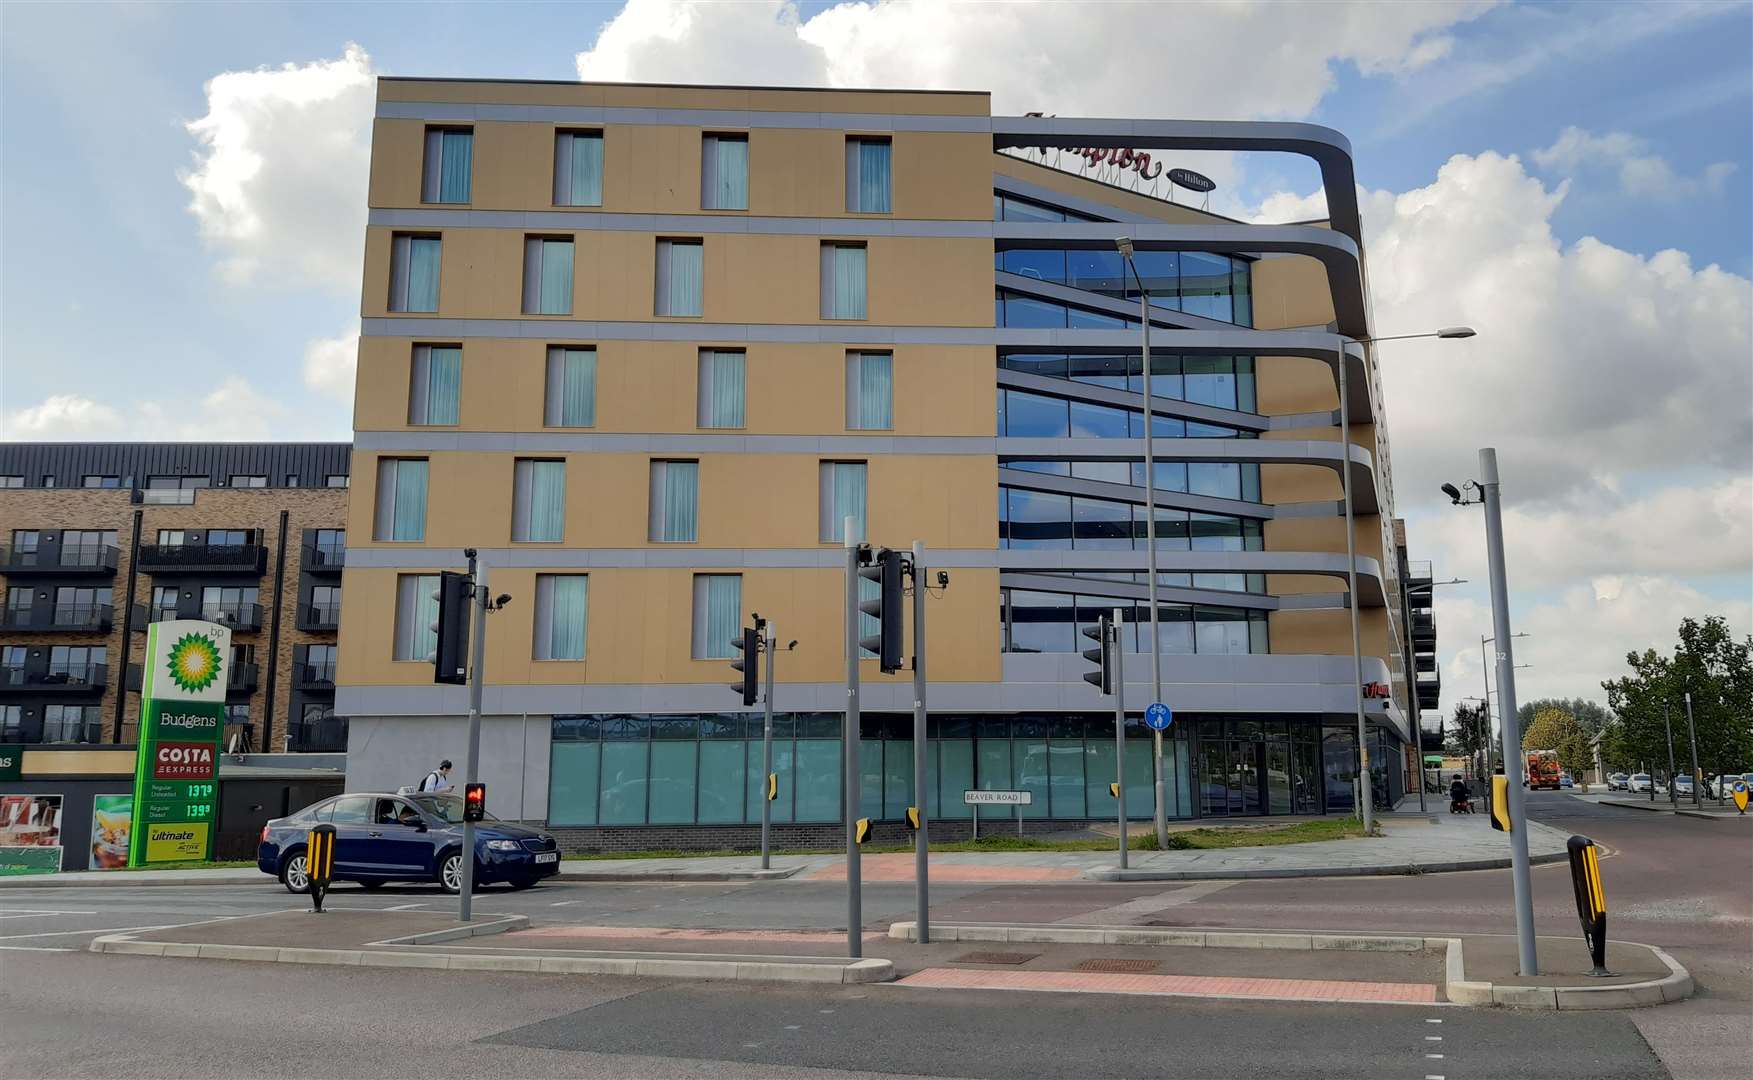 Owned by Victoria Point Hotel Limited and developed by Rees Mellish, the 140-room hotel is the 39th Hampton by Hilton in the UK